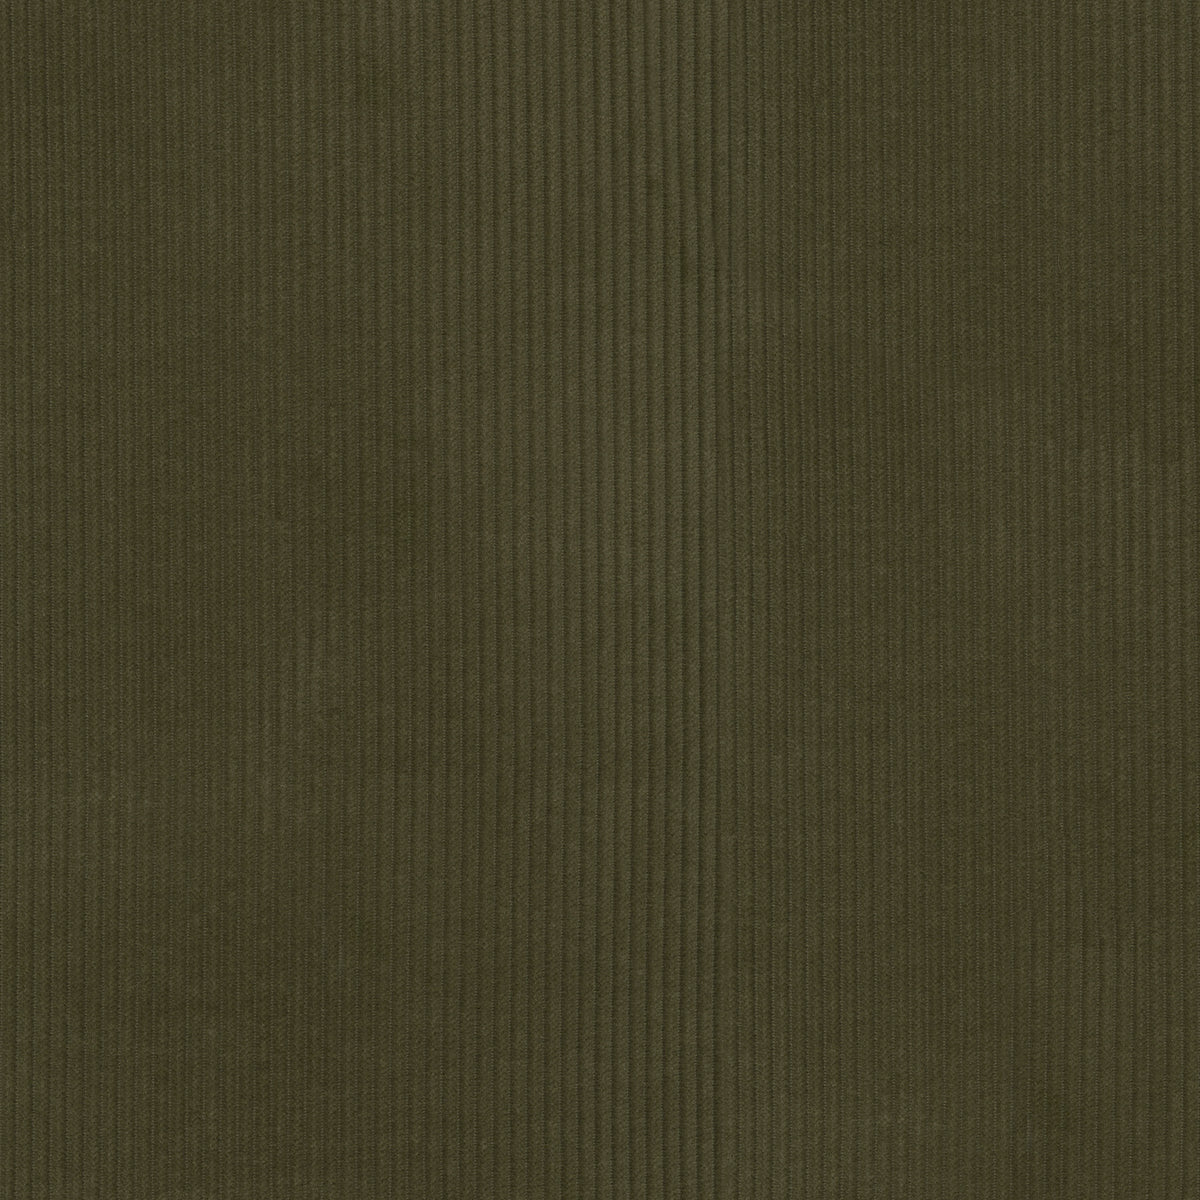 P/K Lifestyles Wales - Moss 412029 Upholstery Fabric